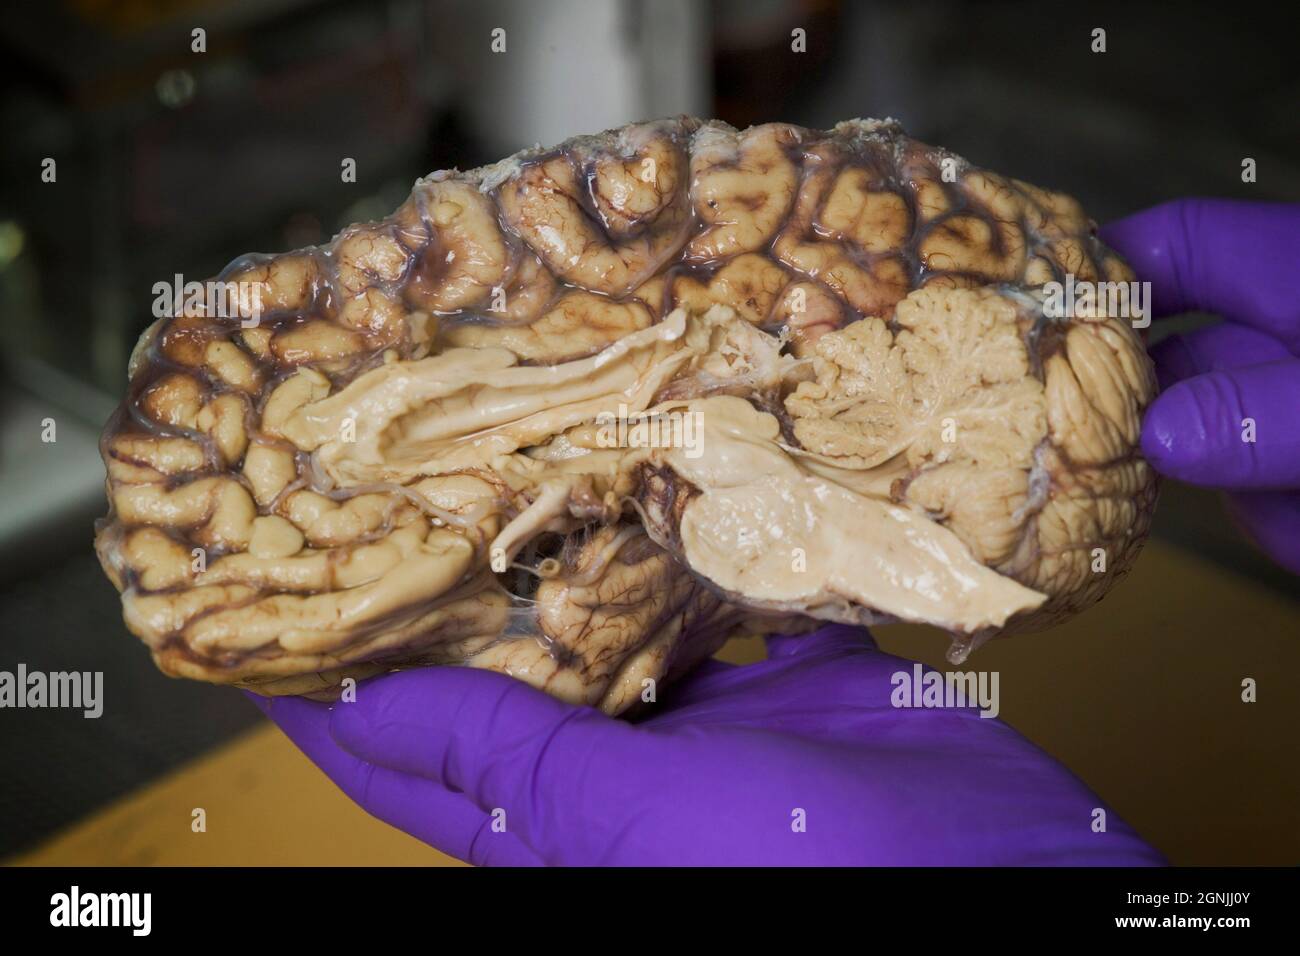 Technician holds hemisphere of human brain, which has been treated with formalin for preservation, before storage in brain bank for medical research Stock Photo